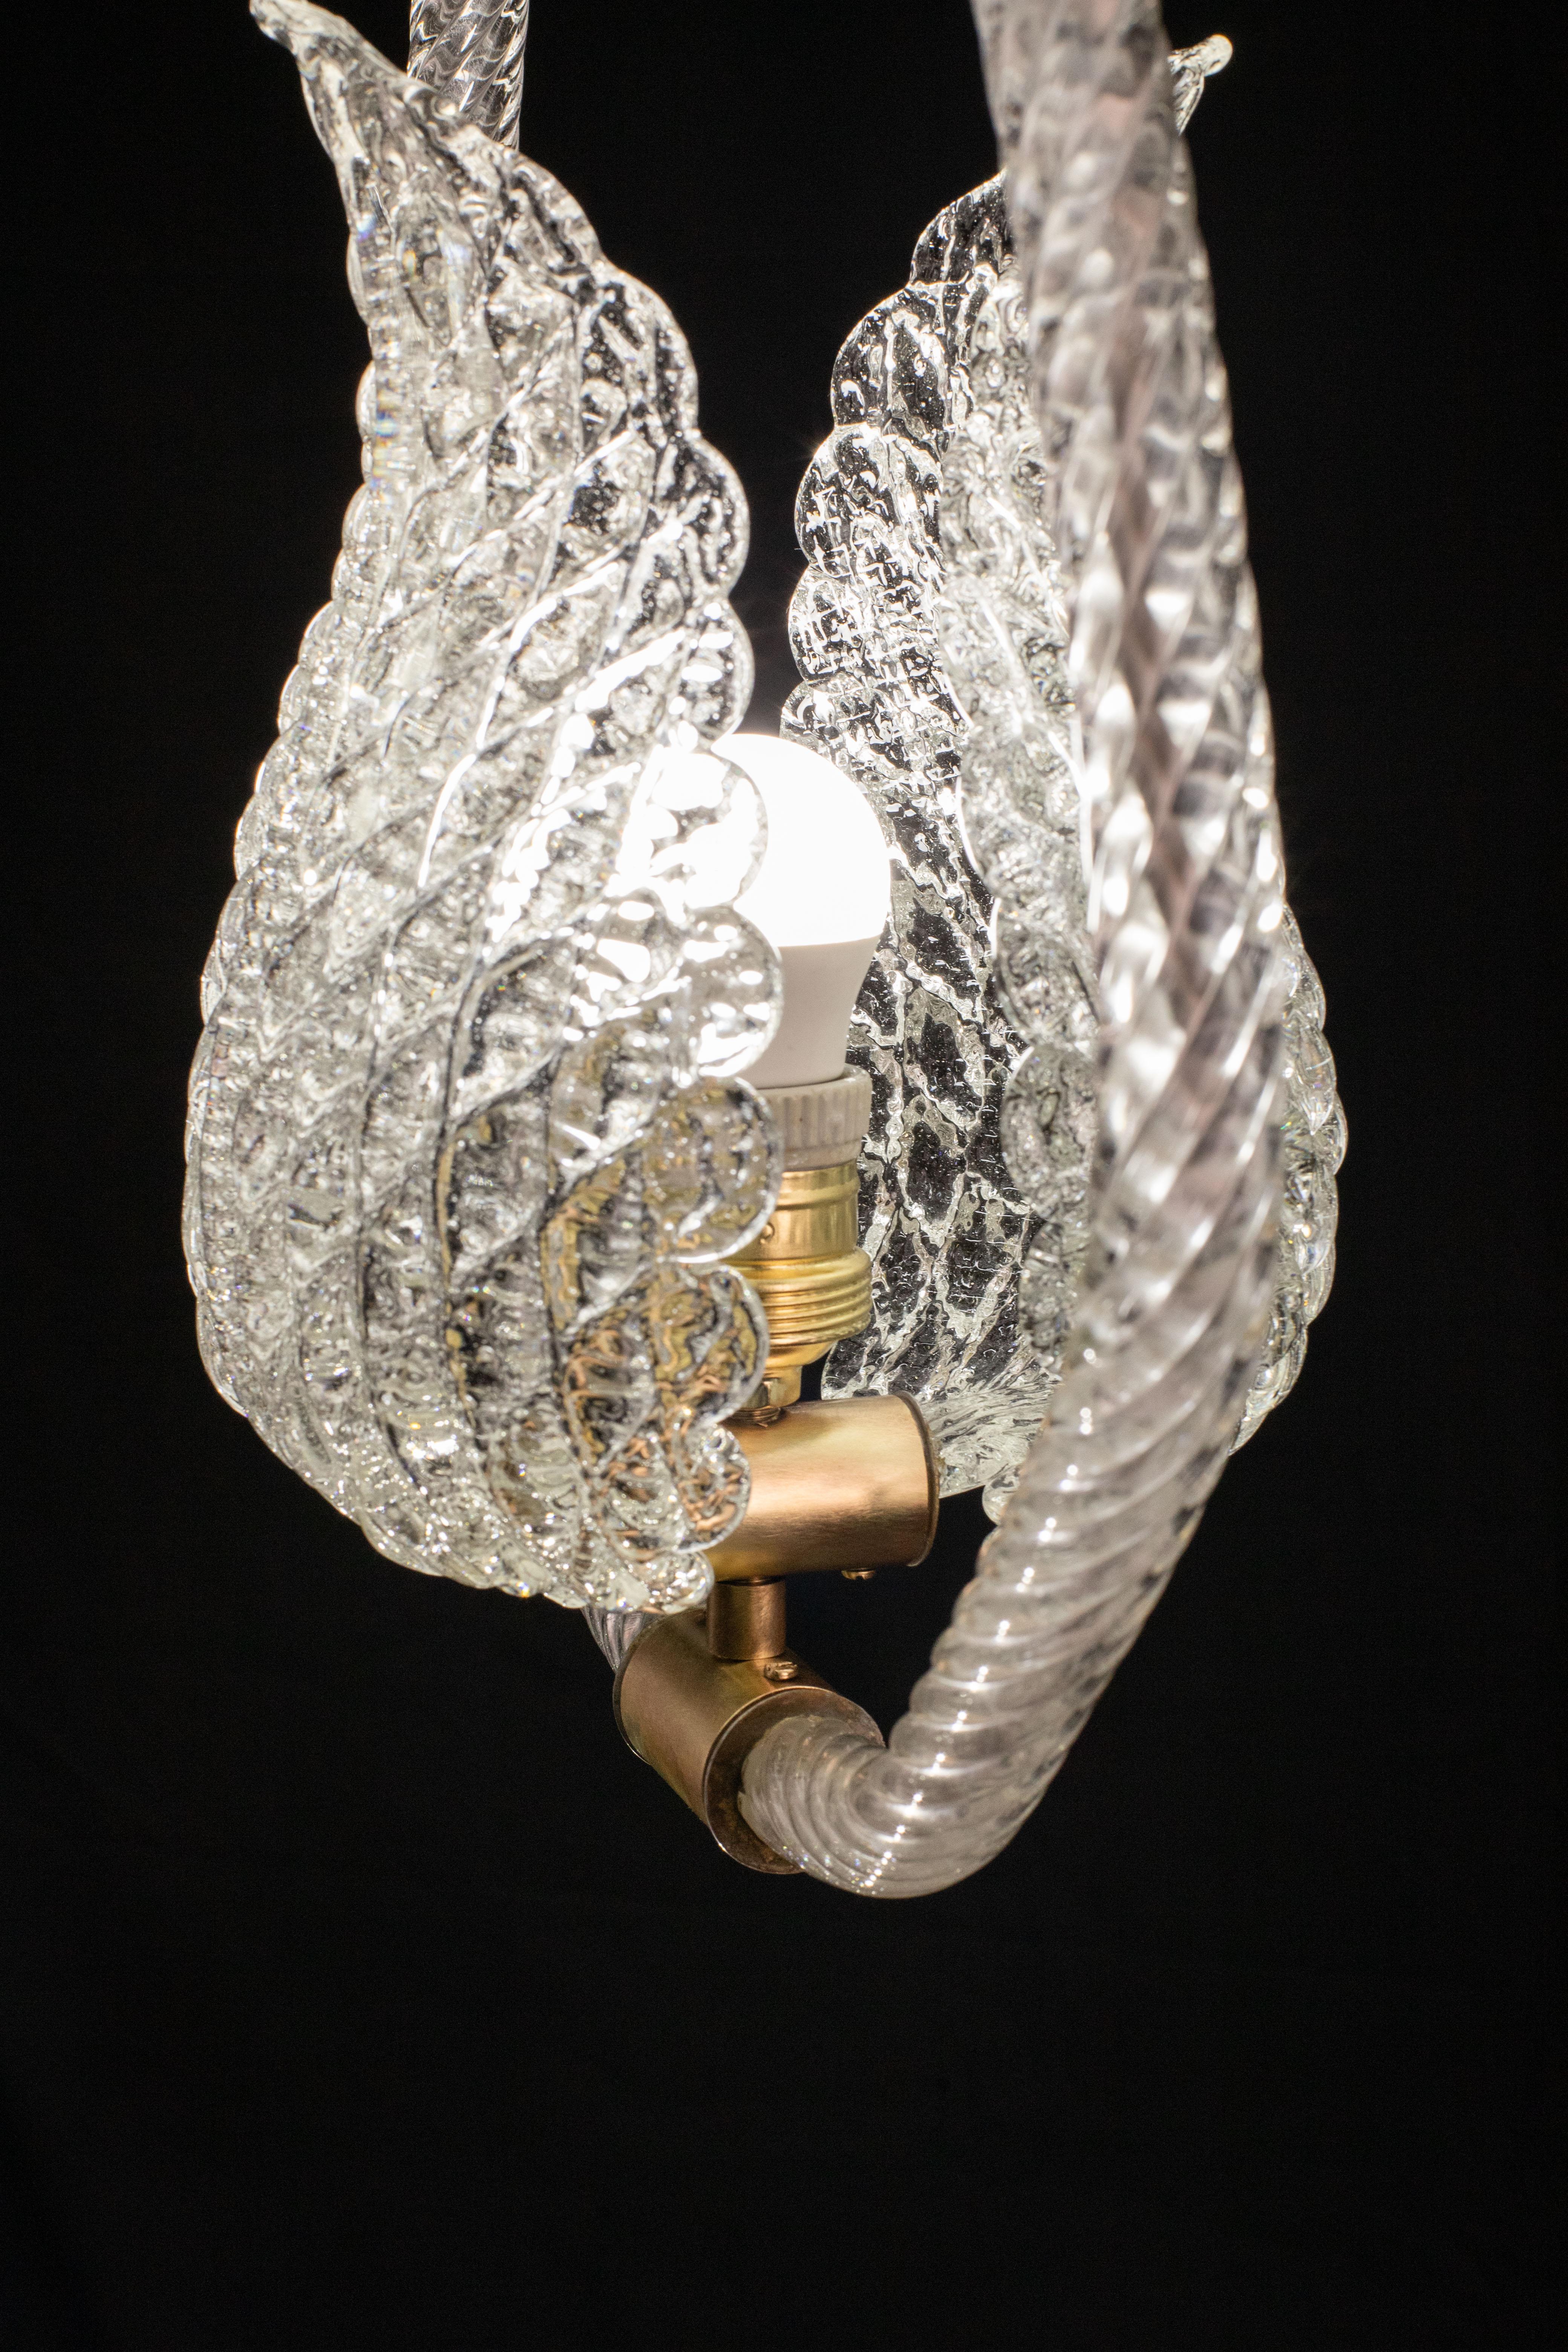 Trasparent Jewel Murano Glass Chandelier by Barovier e Toso, 1950s For Sale 3